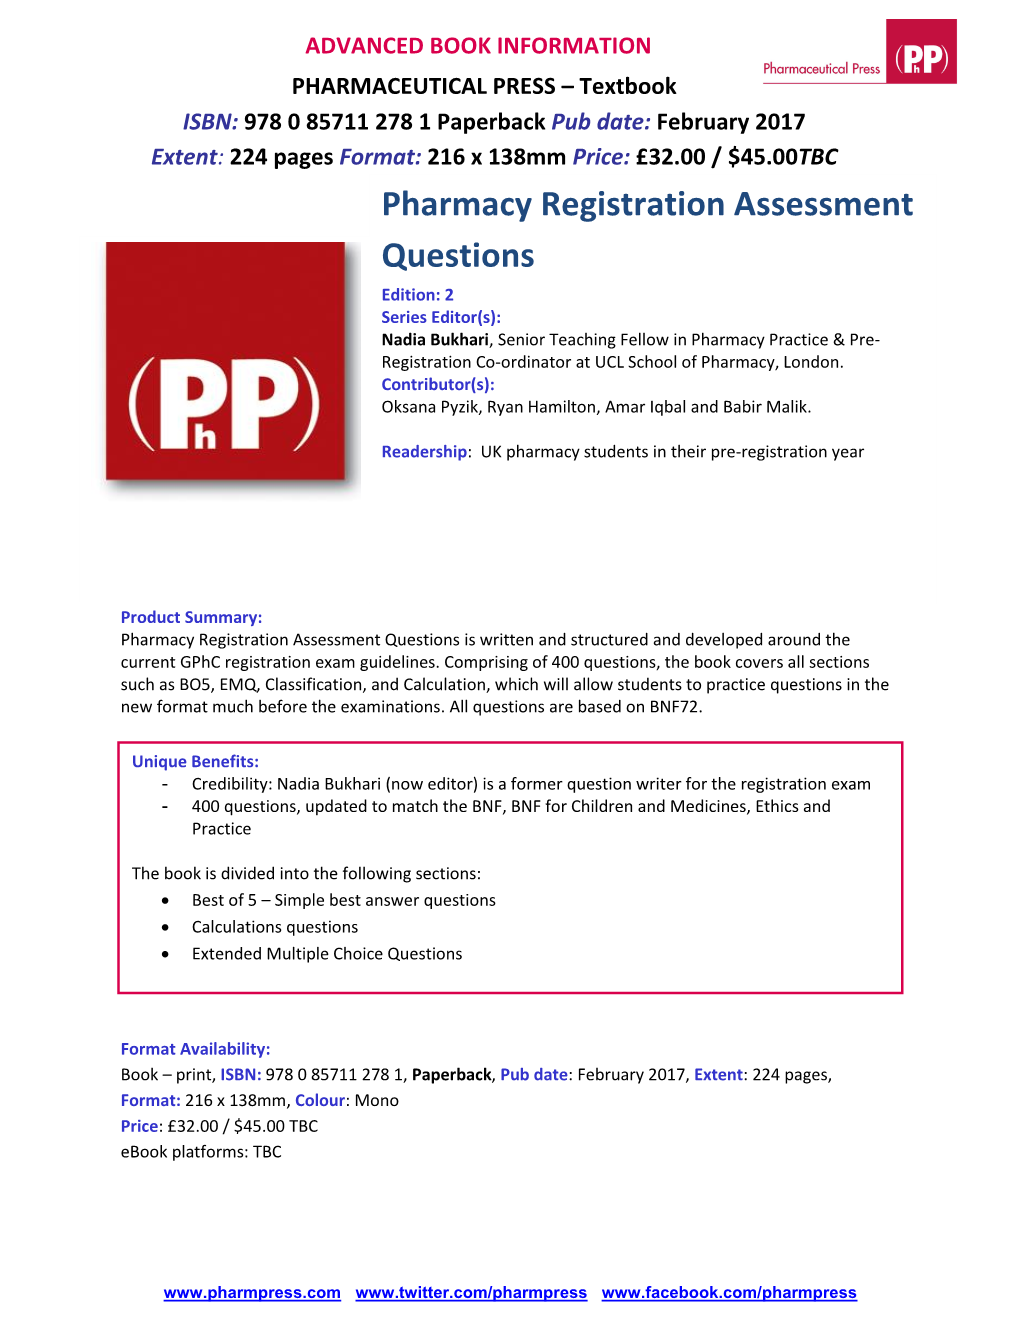 Pharmacy Registration Assessment Questions, Edition 2